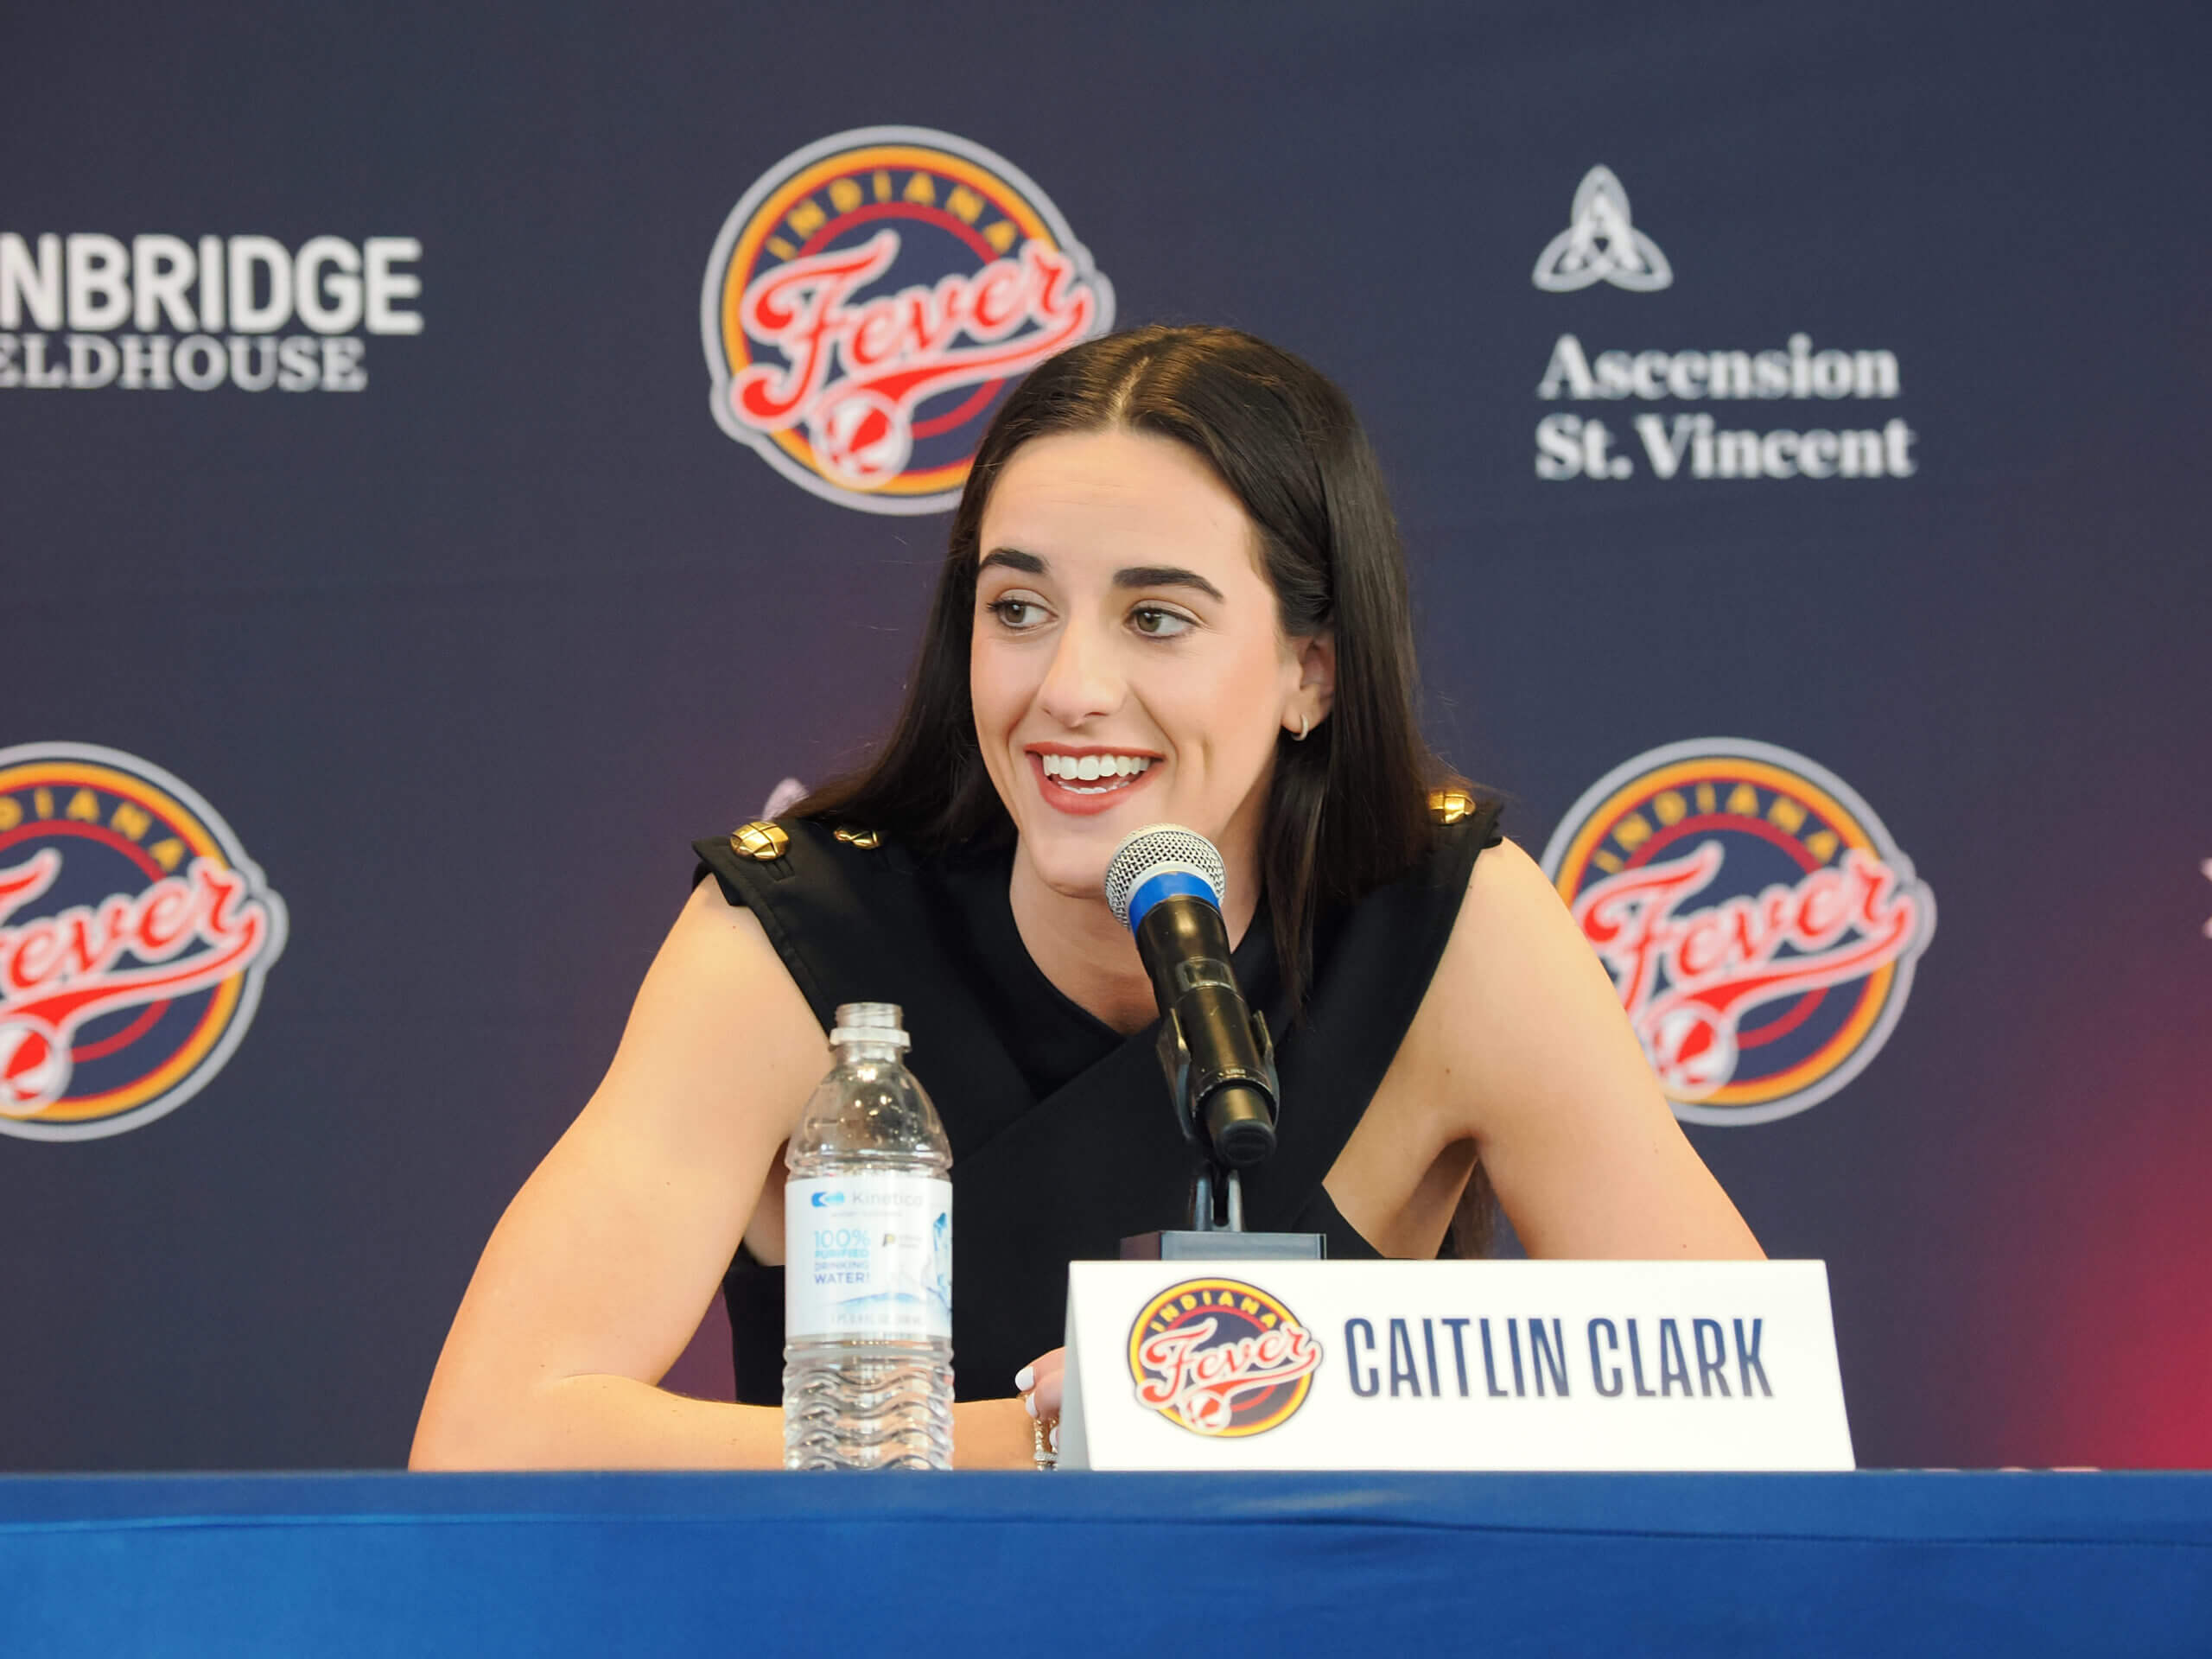 Caitlin Clark nearing endorsement deal with Nike: Sources